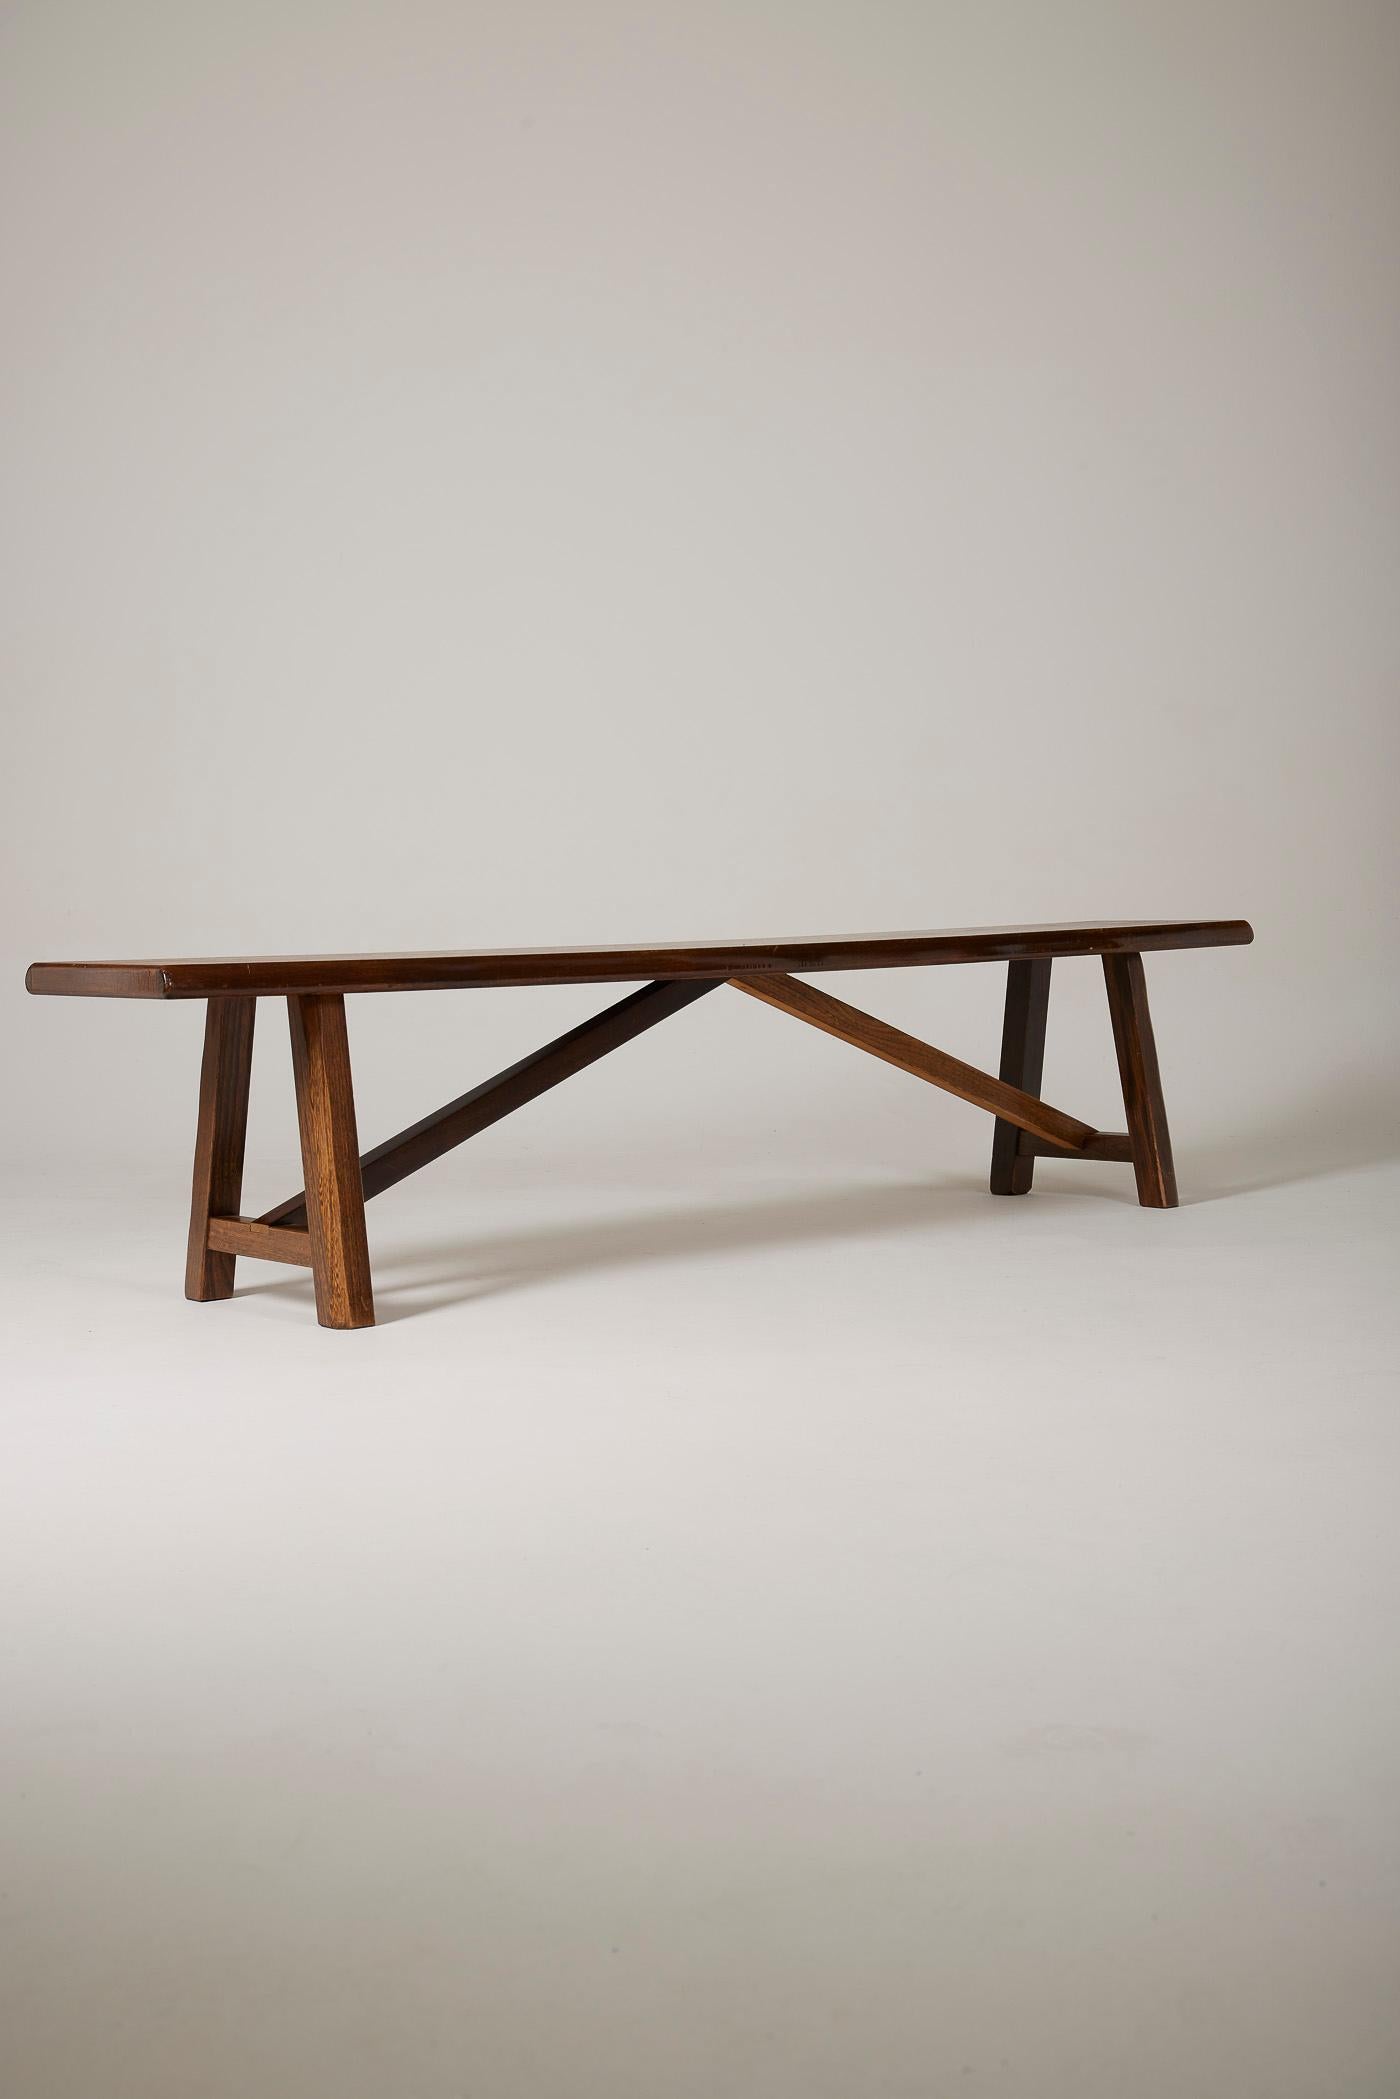 Mid-20th Century Solid wood bench